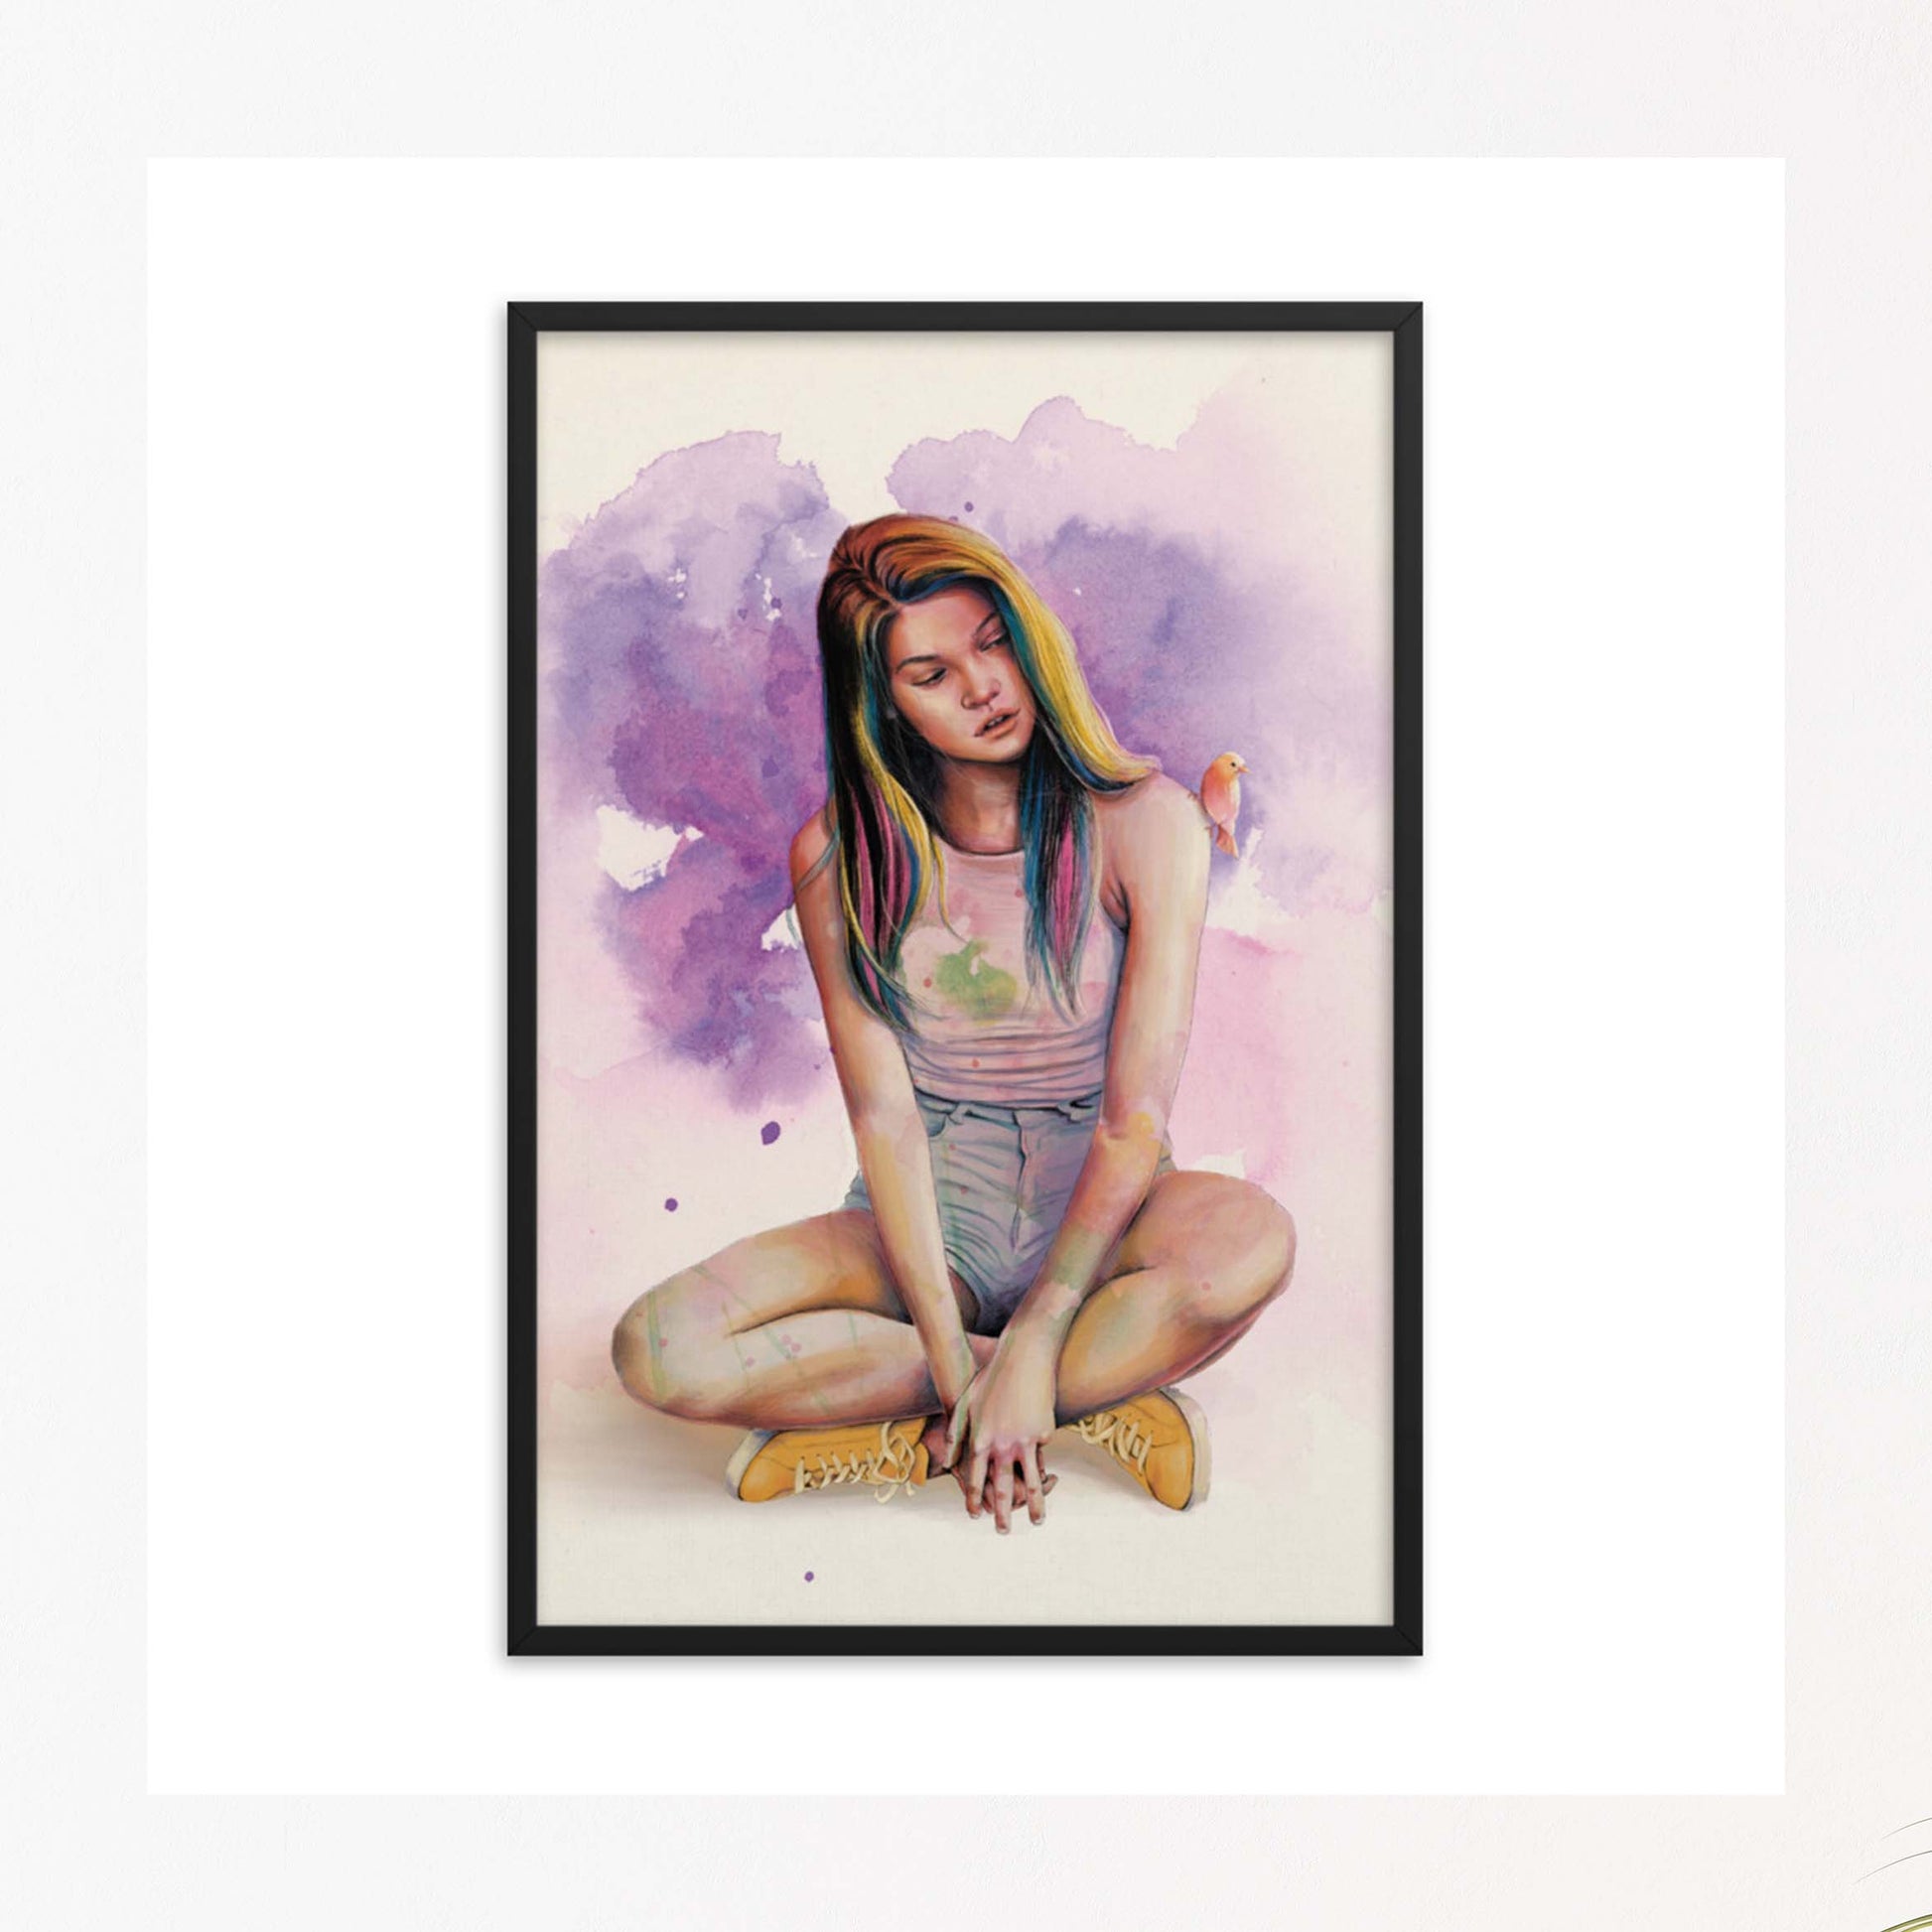 A girl in yellow shoes sitting idly with a bird sitting on her shoulder art poster in purple, pink & yellow hues black framed poster